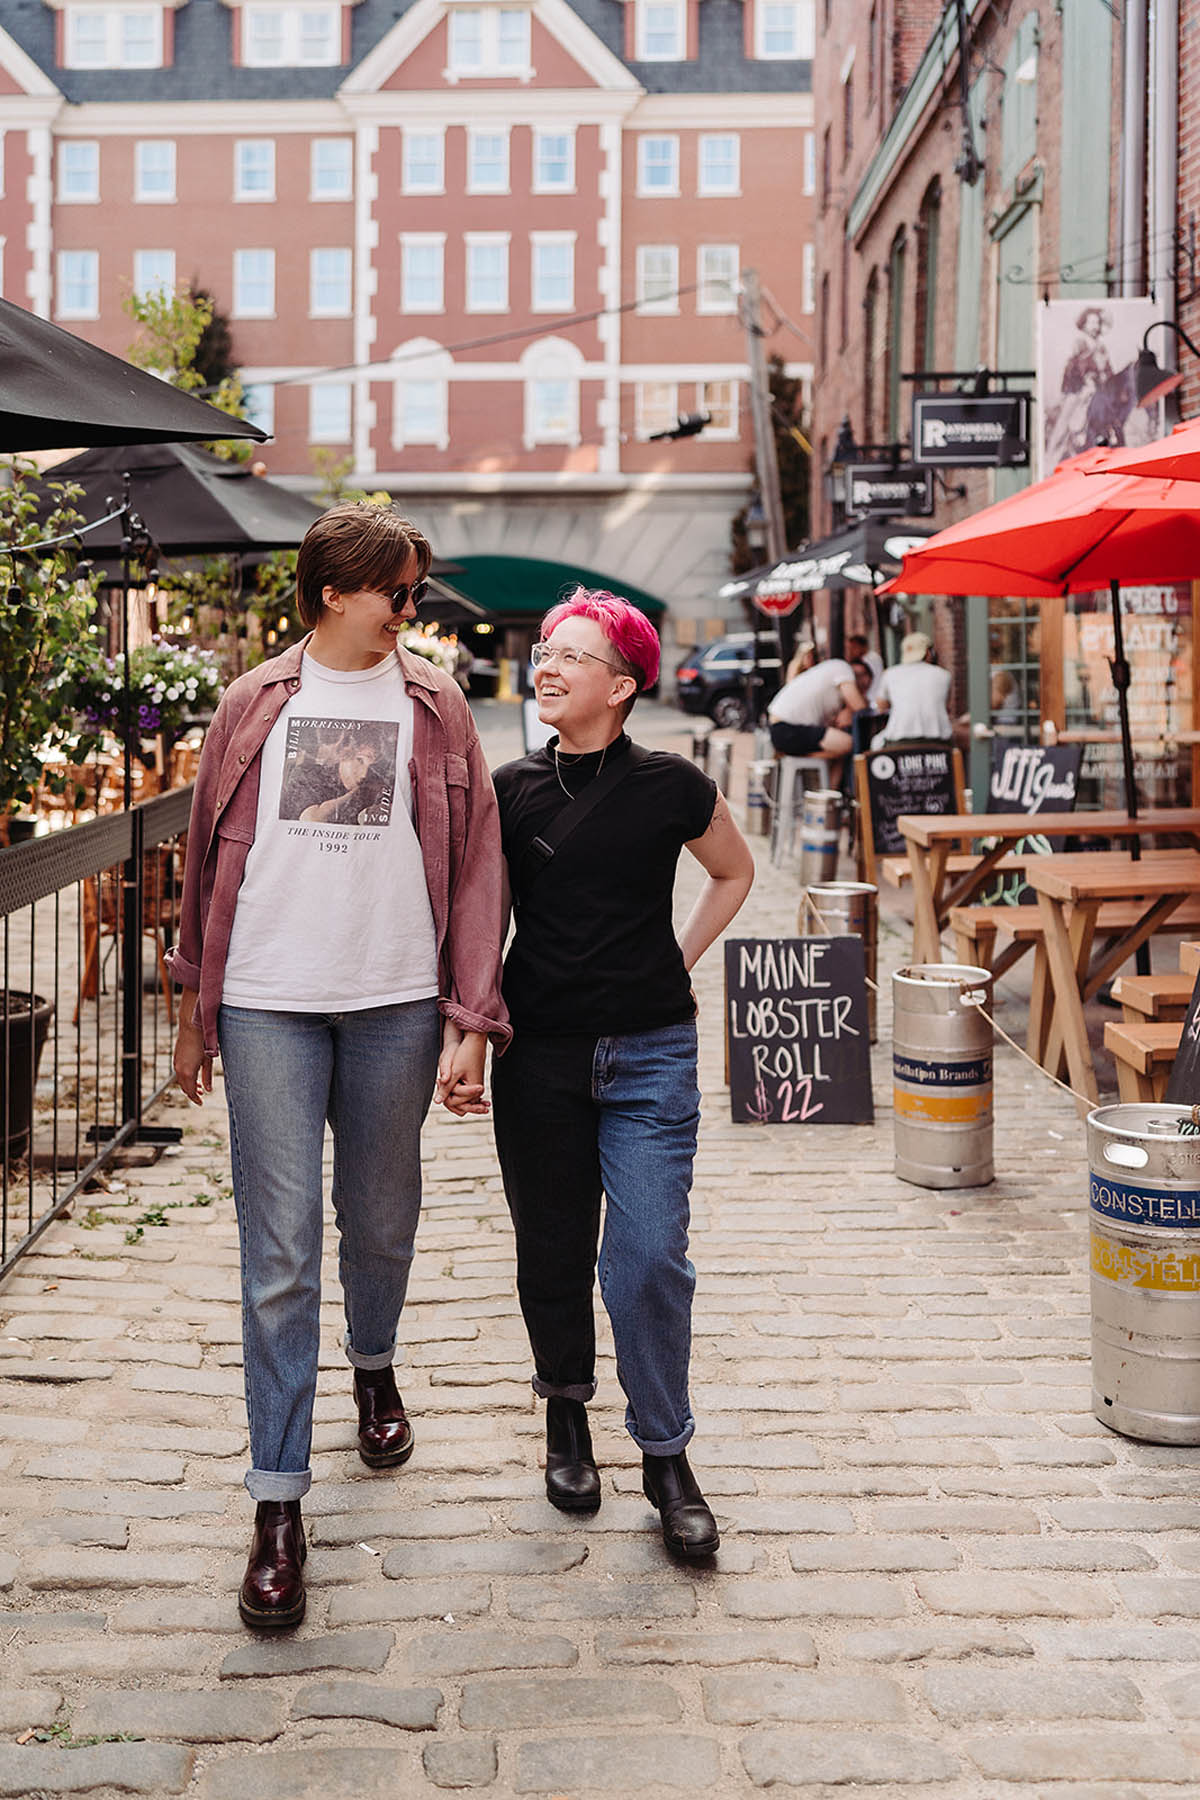 Two white people hold hands as they walk down a cobblestone street. There is a sign behind them that says "Maine Lobster Roll $22"